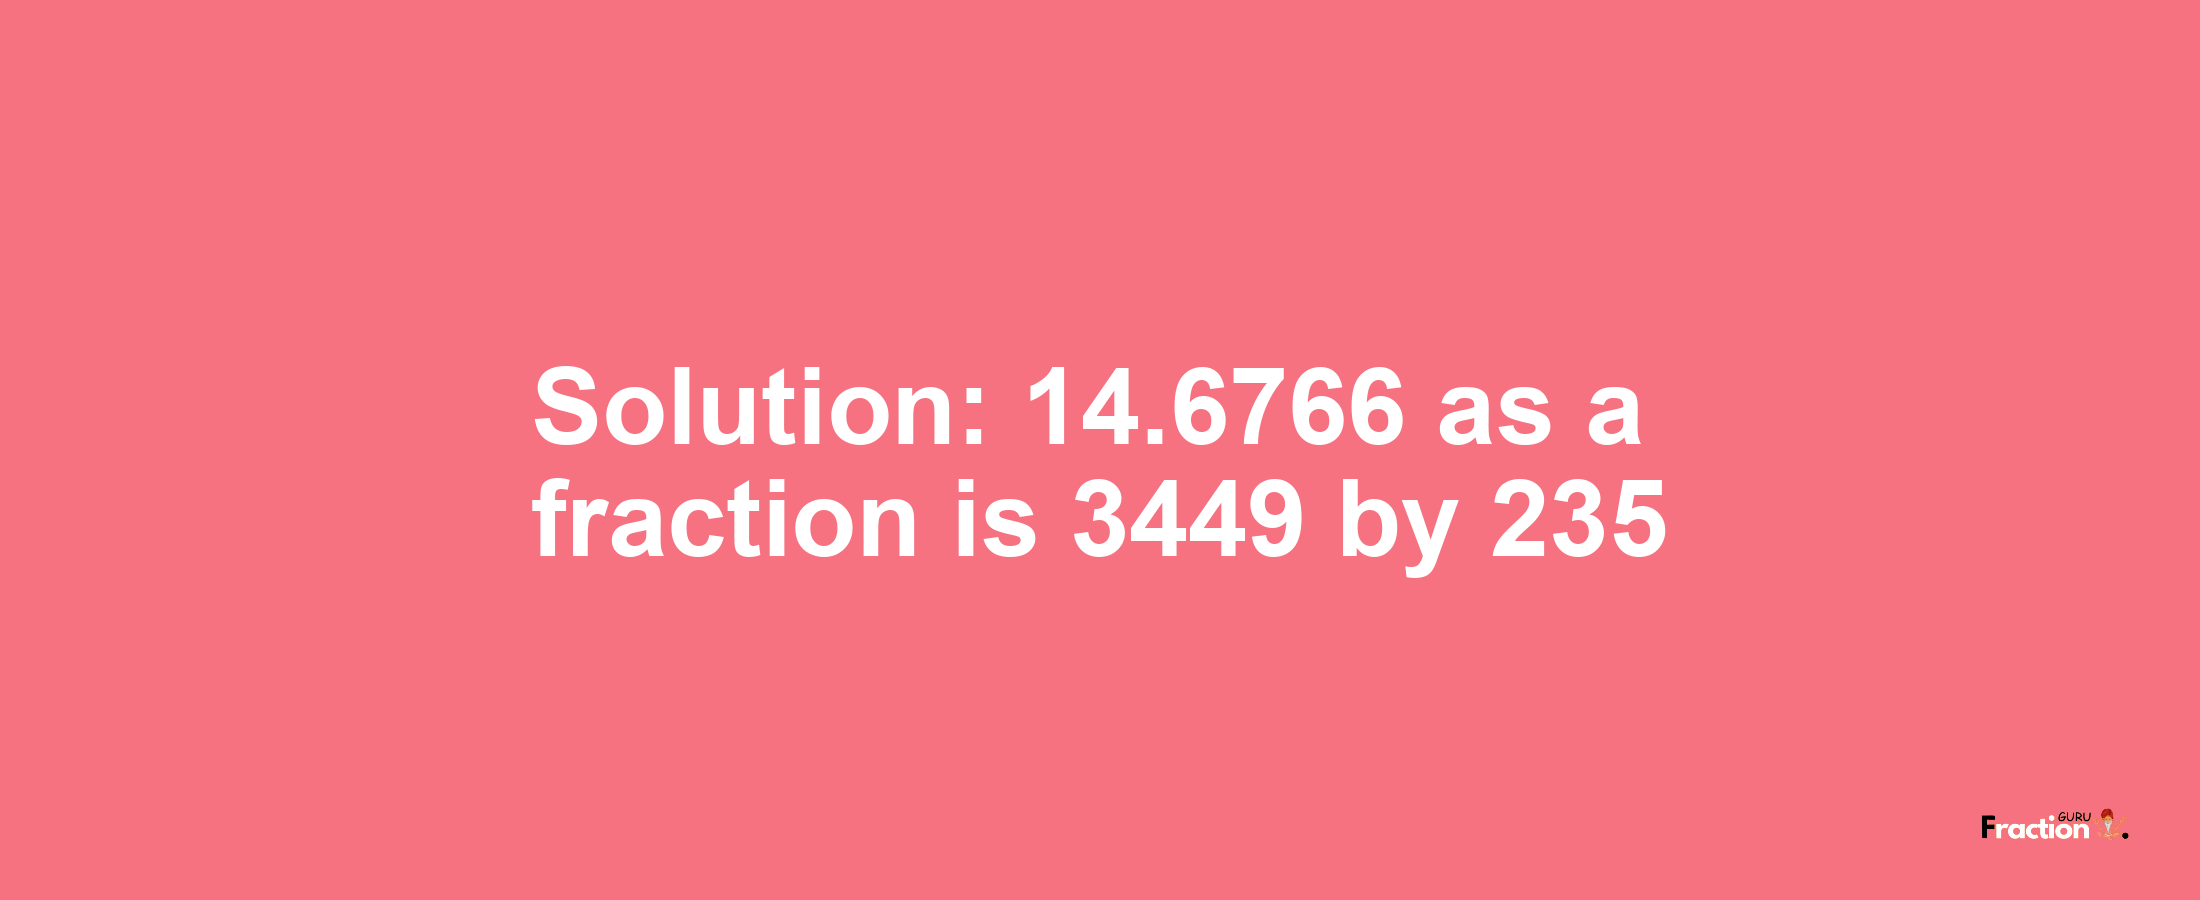 Solution:14.6766 as a fraction is 3449/235